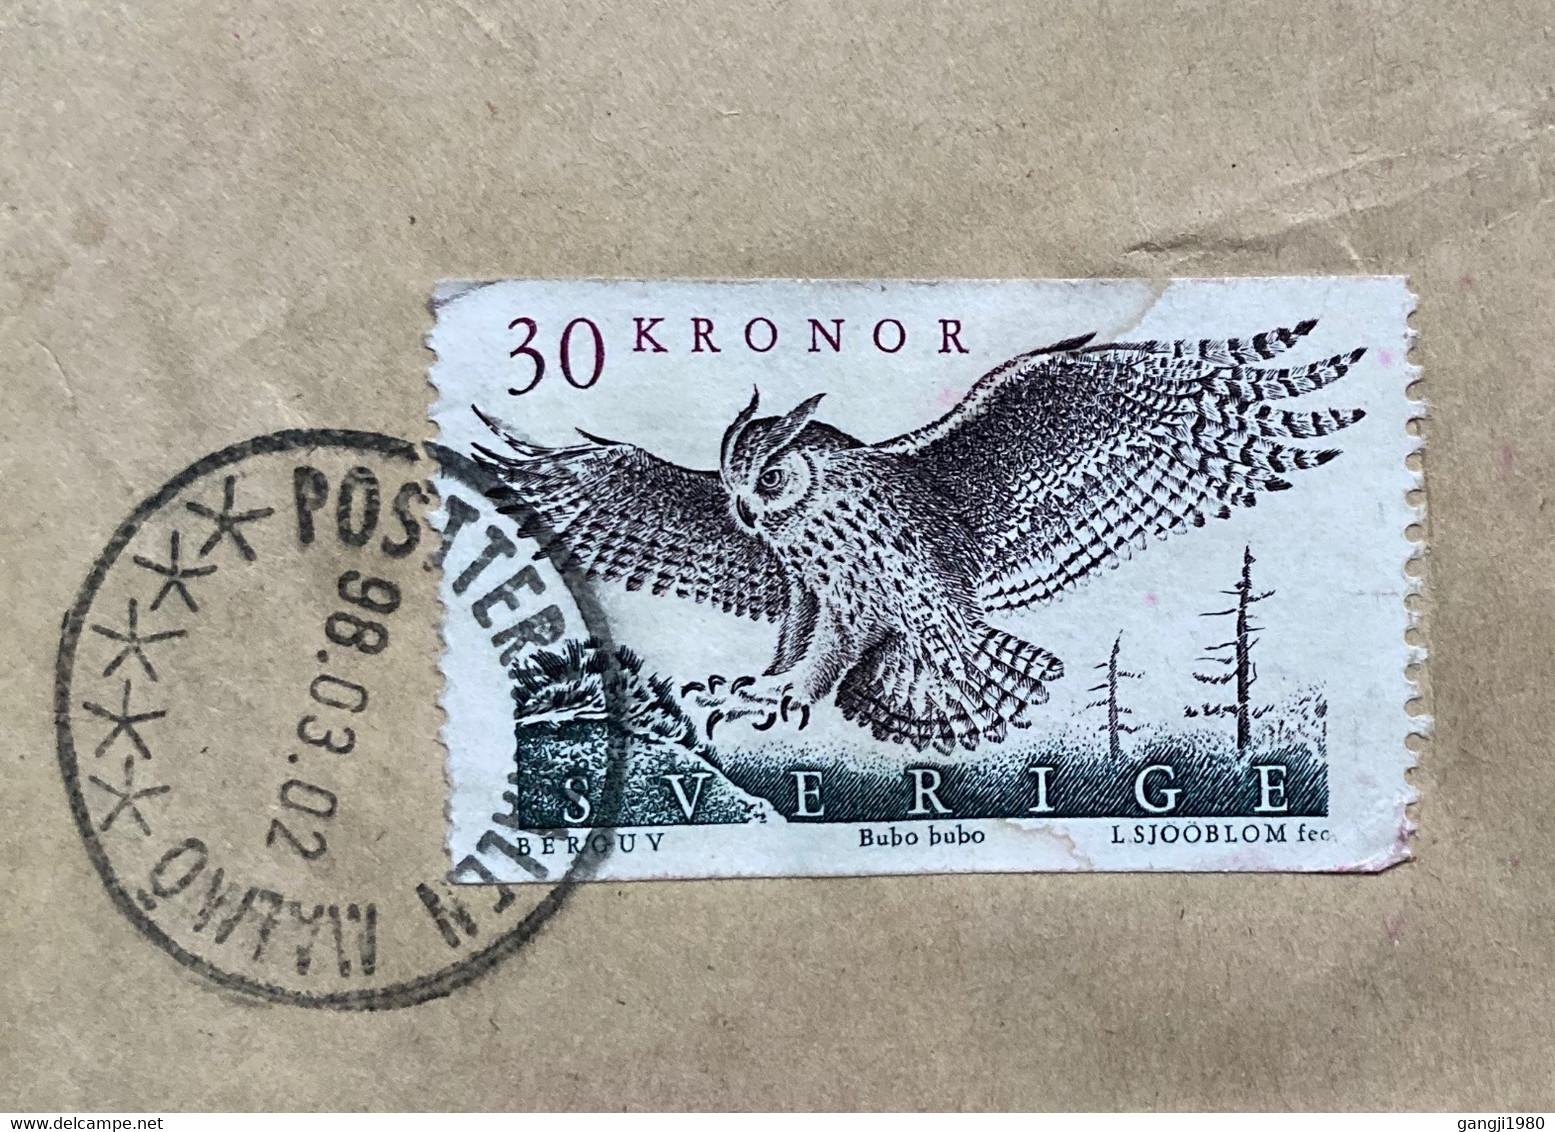 SWEDEN 1998, EAGLE BIRD 30kr RATE!! ECONOMIC VIGNETTE LABEL USED COVER TO INDIA,MALMO CITY - Lettres & Documents